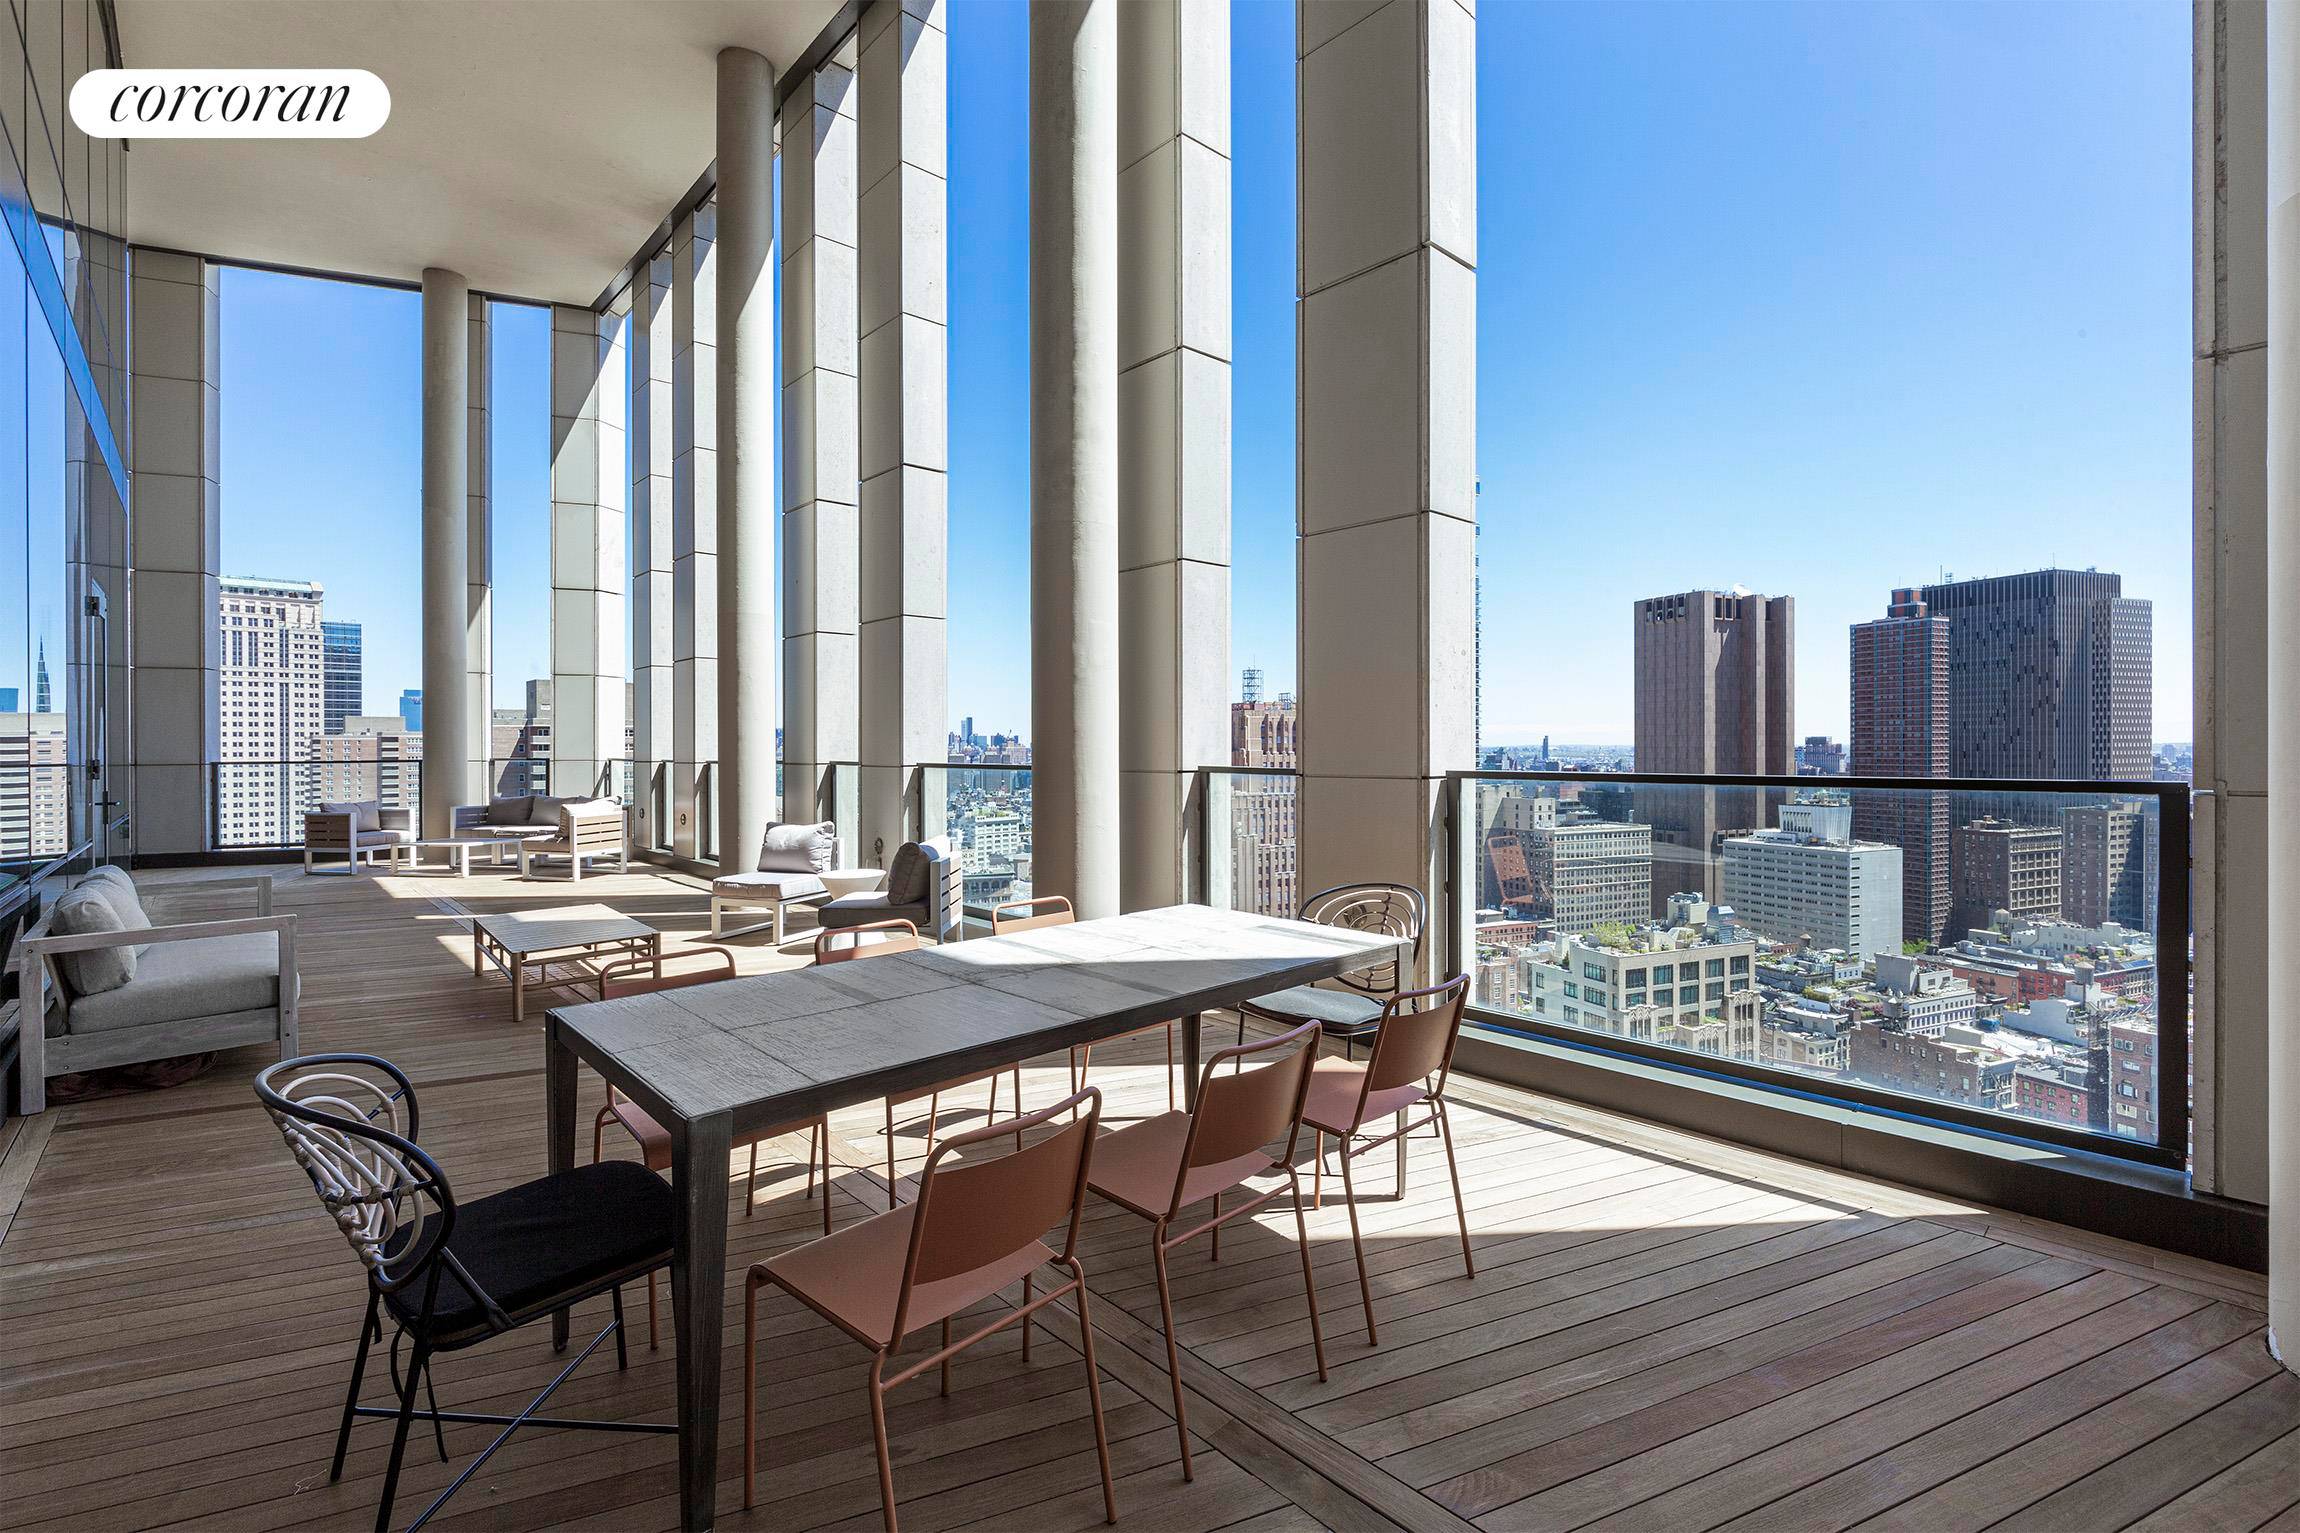 This stunning penthouse offers an exquisite look into premiere downtown luxury living with 2, 300 square feet of interior space and a 1, 100 square foot exterior.